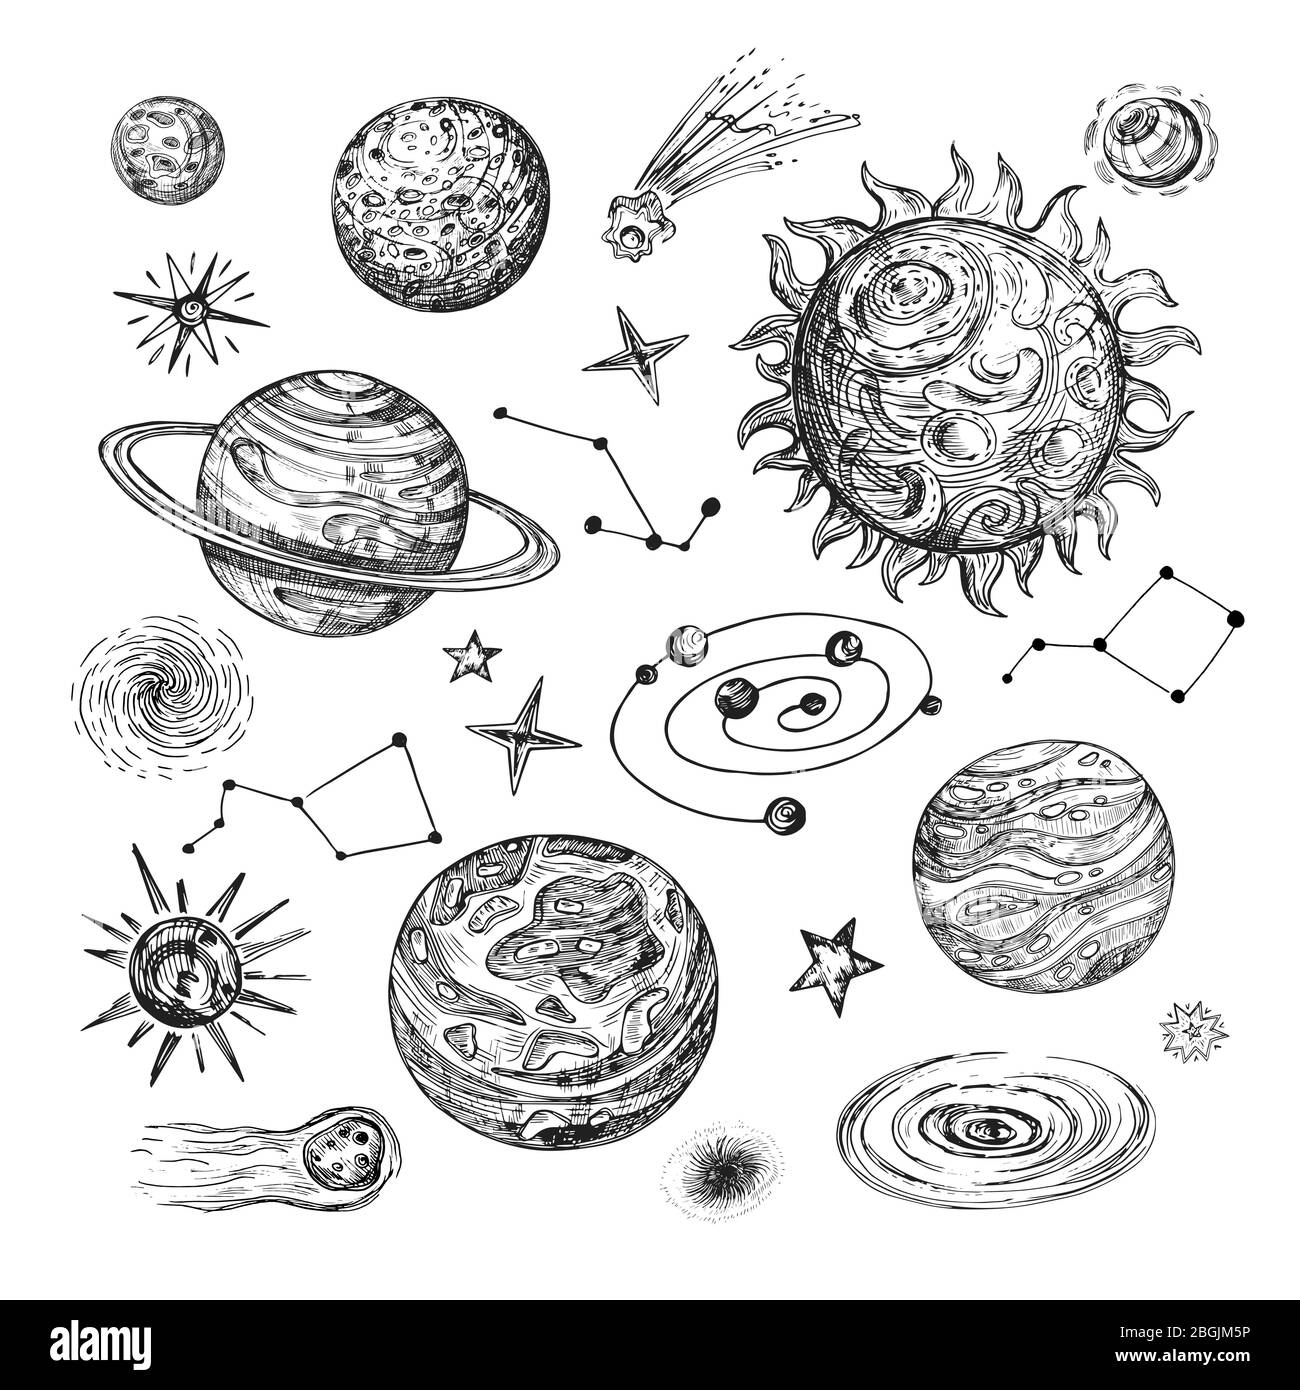 Hand drawn sun, planets, stars, comet, asteroid, galaxy. Vintage astronomical vector illustration in engraving style. Planet and comet, moon and sun, galaxy and asteroid Stock Vector